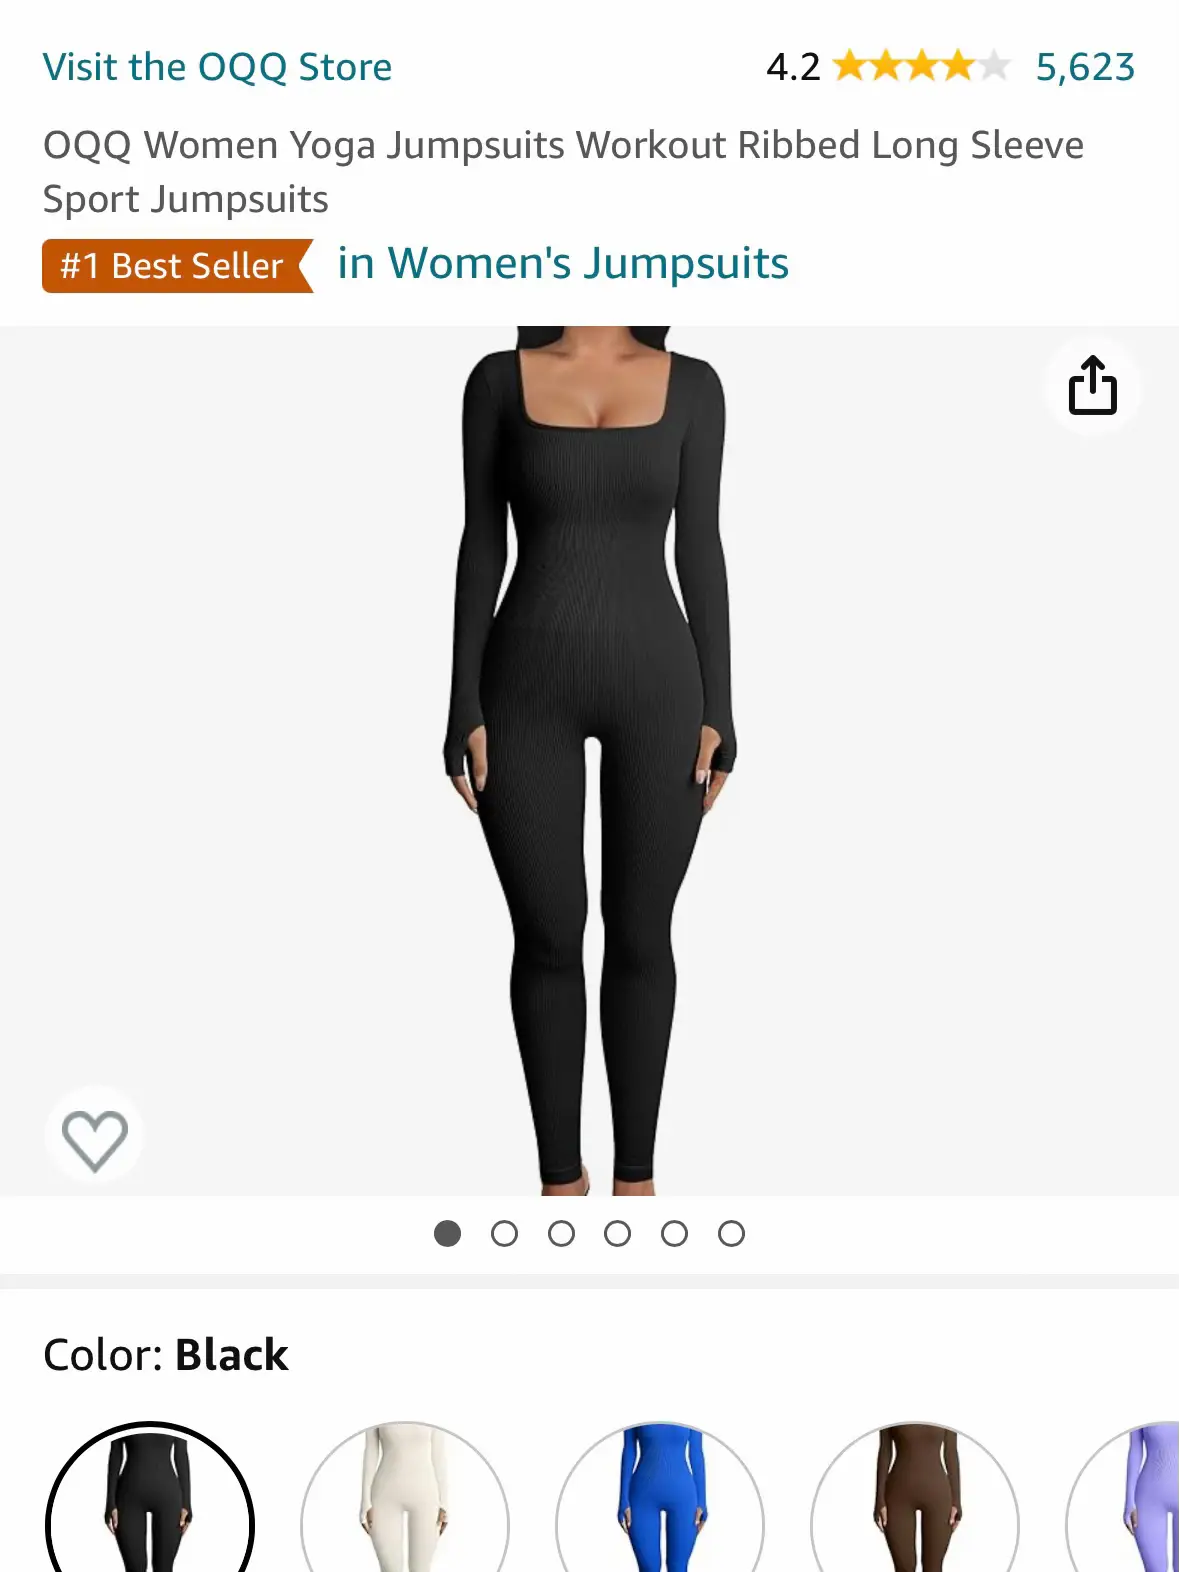 Shapewear for Women Tummy Control Yoga Jumpsuits Workout Ribbed